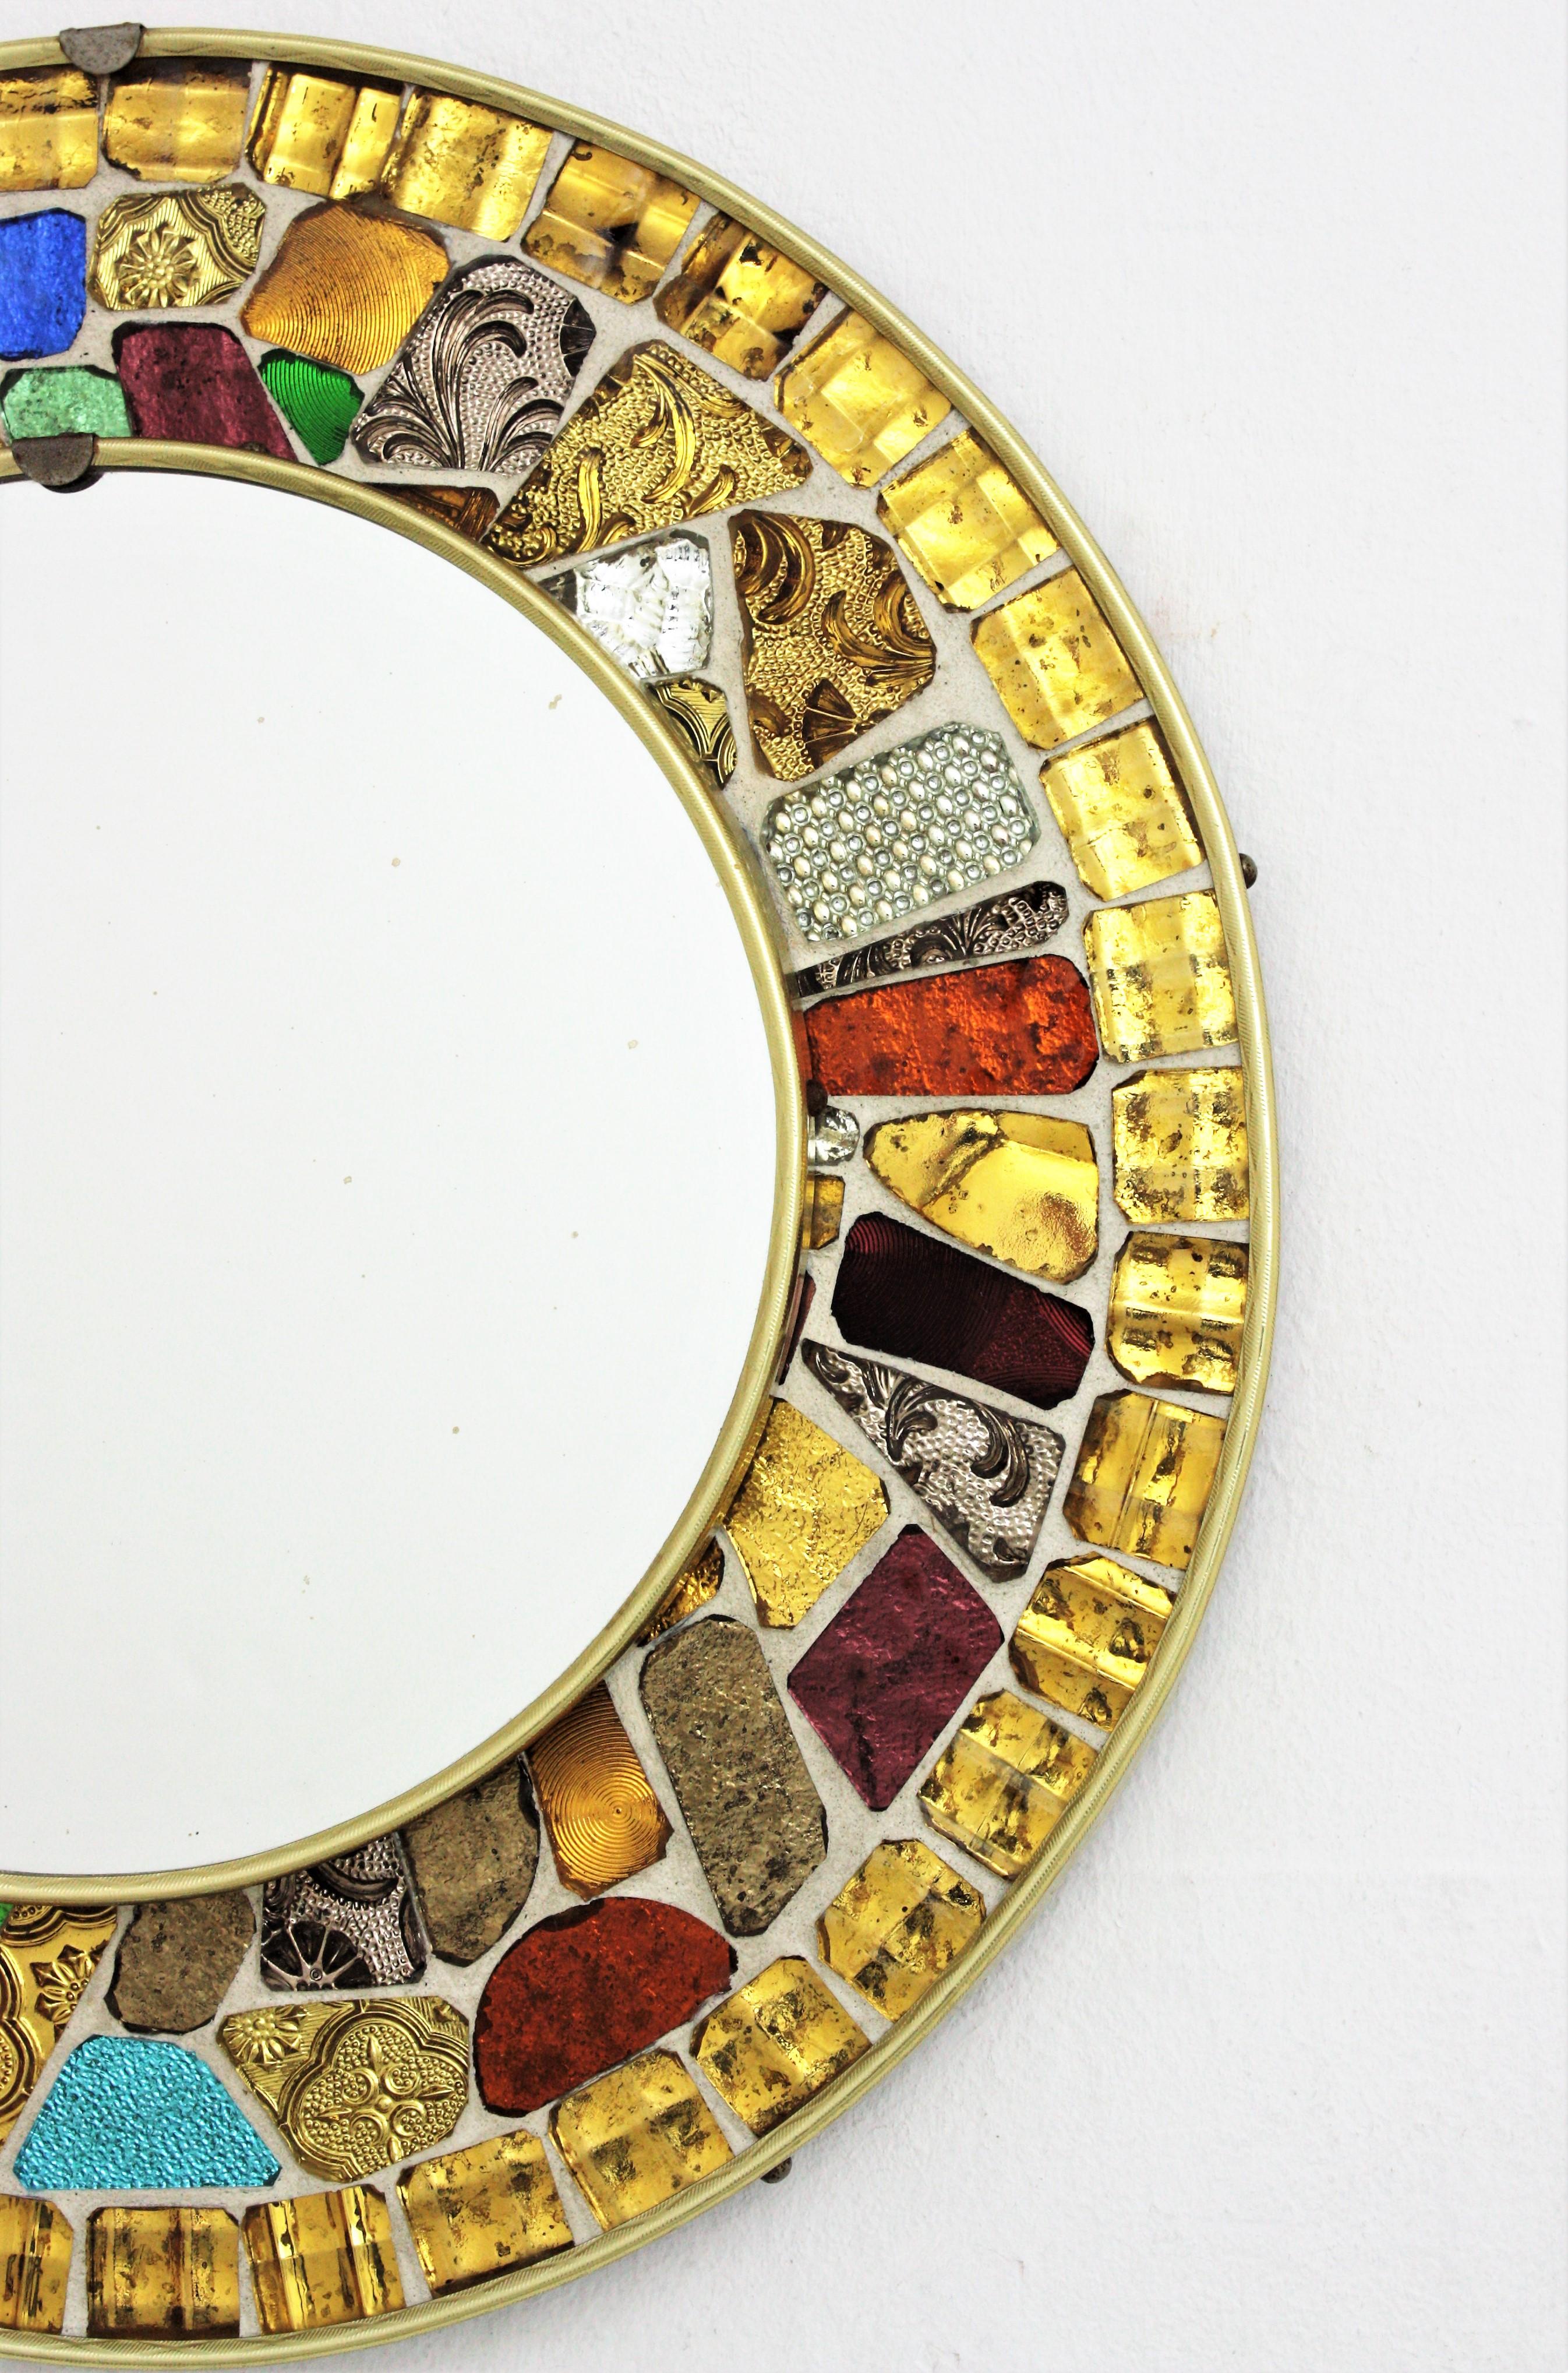 Spanish Midcentury Round Mirror with Muti Color Glass Mosaic Frame, 1960s For Sale